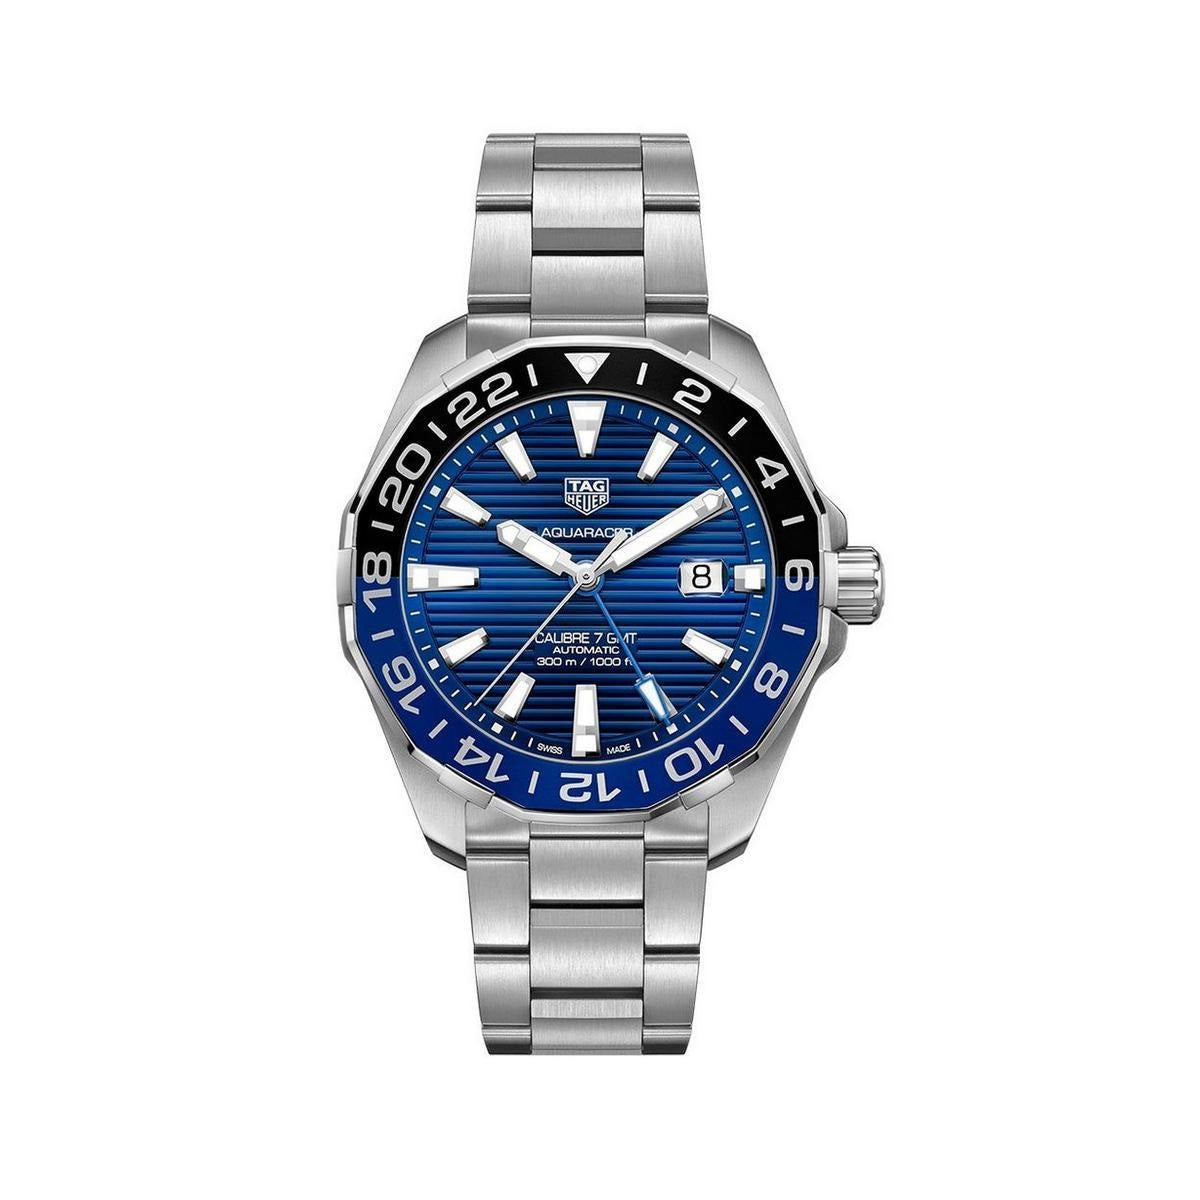 TAG HEUER Aquaracer Calibre 7 Stainless Steel Mens Watch - WAY201T.BA0927